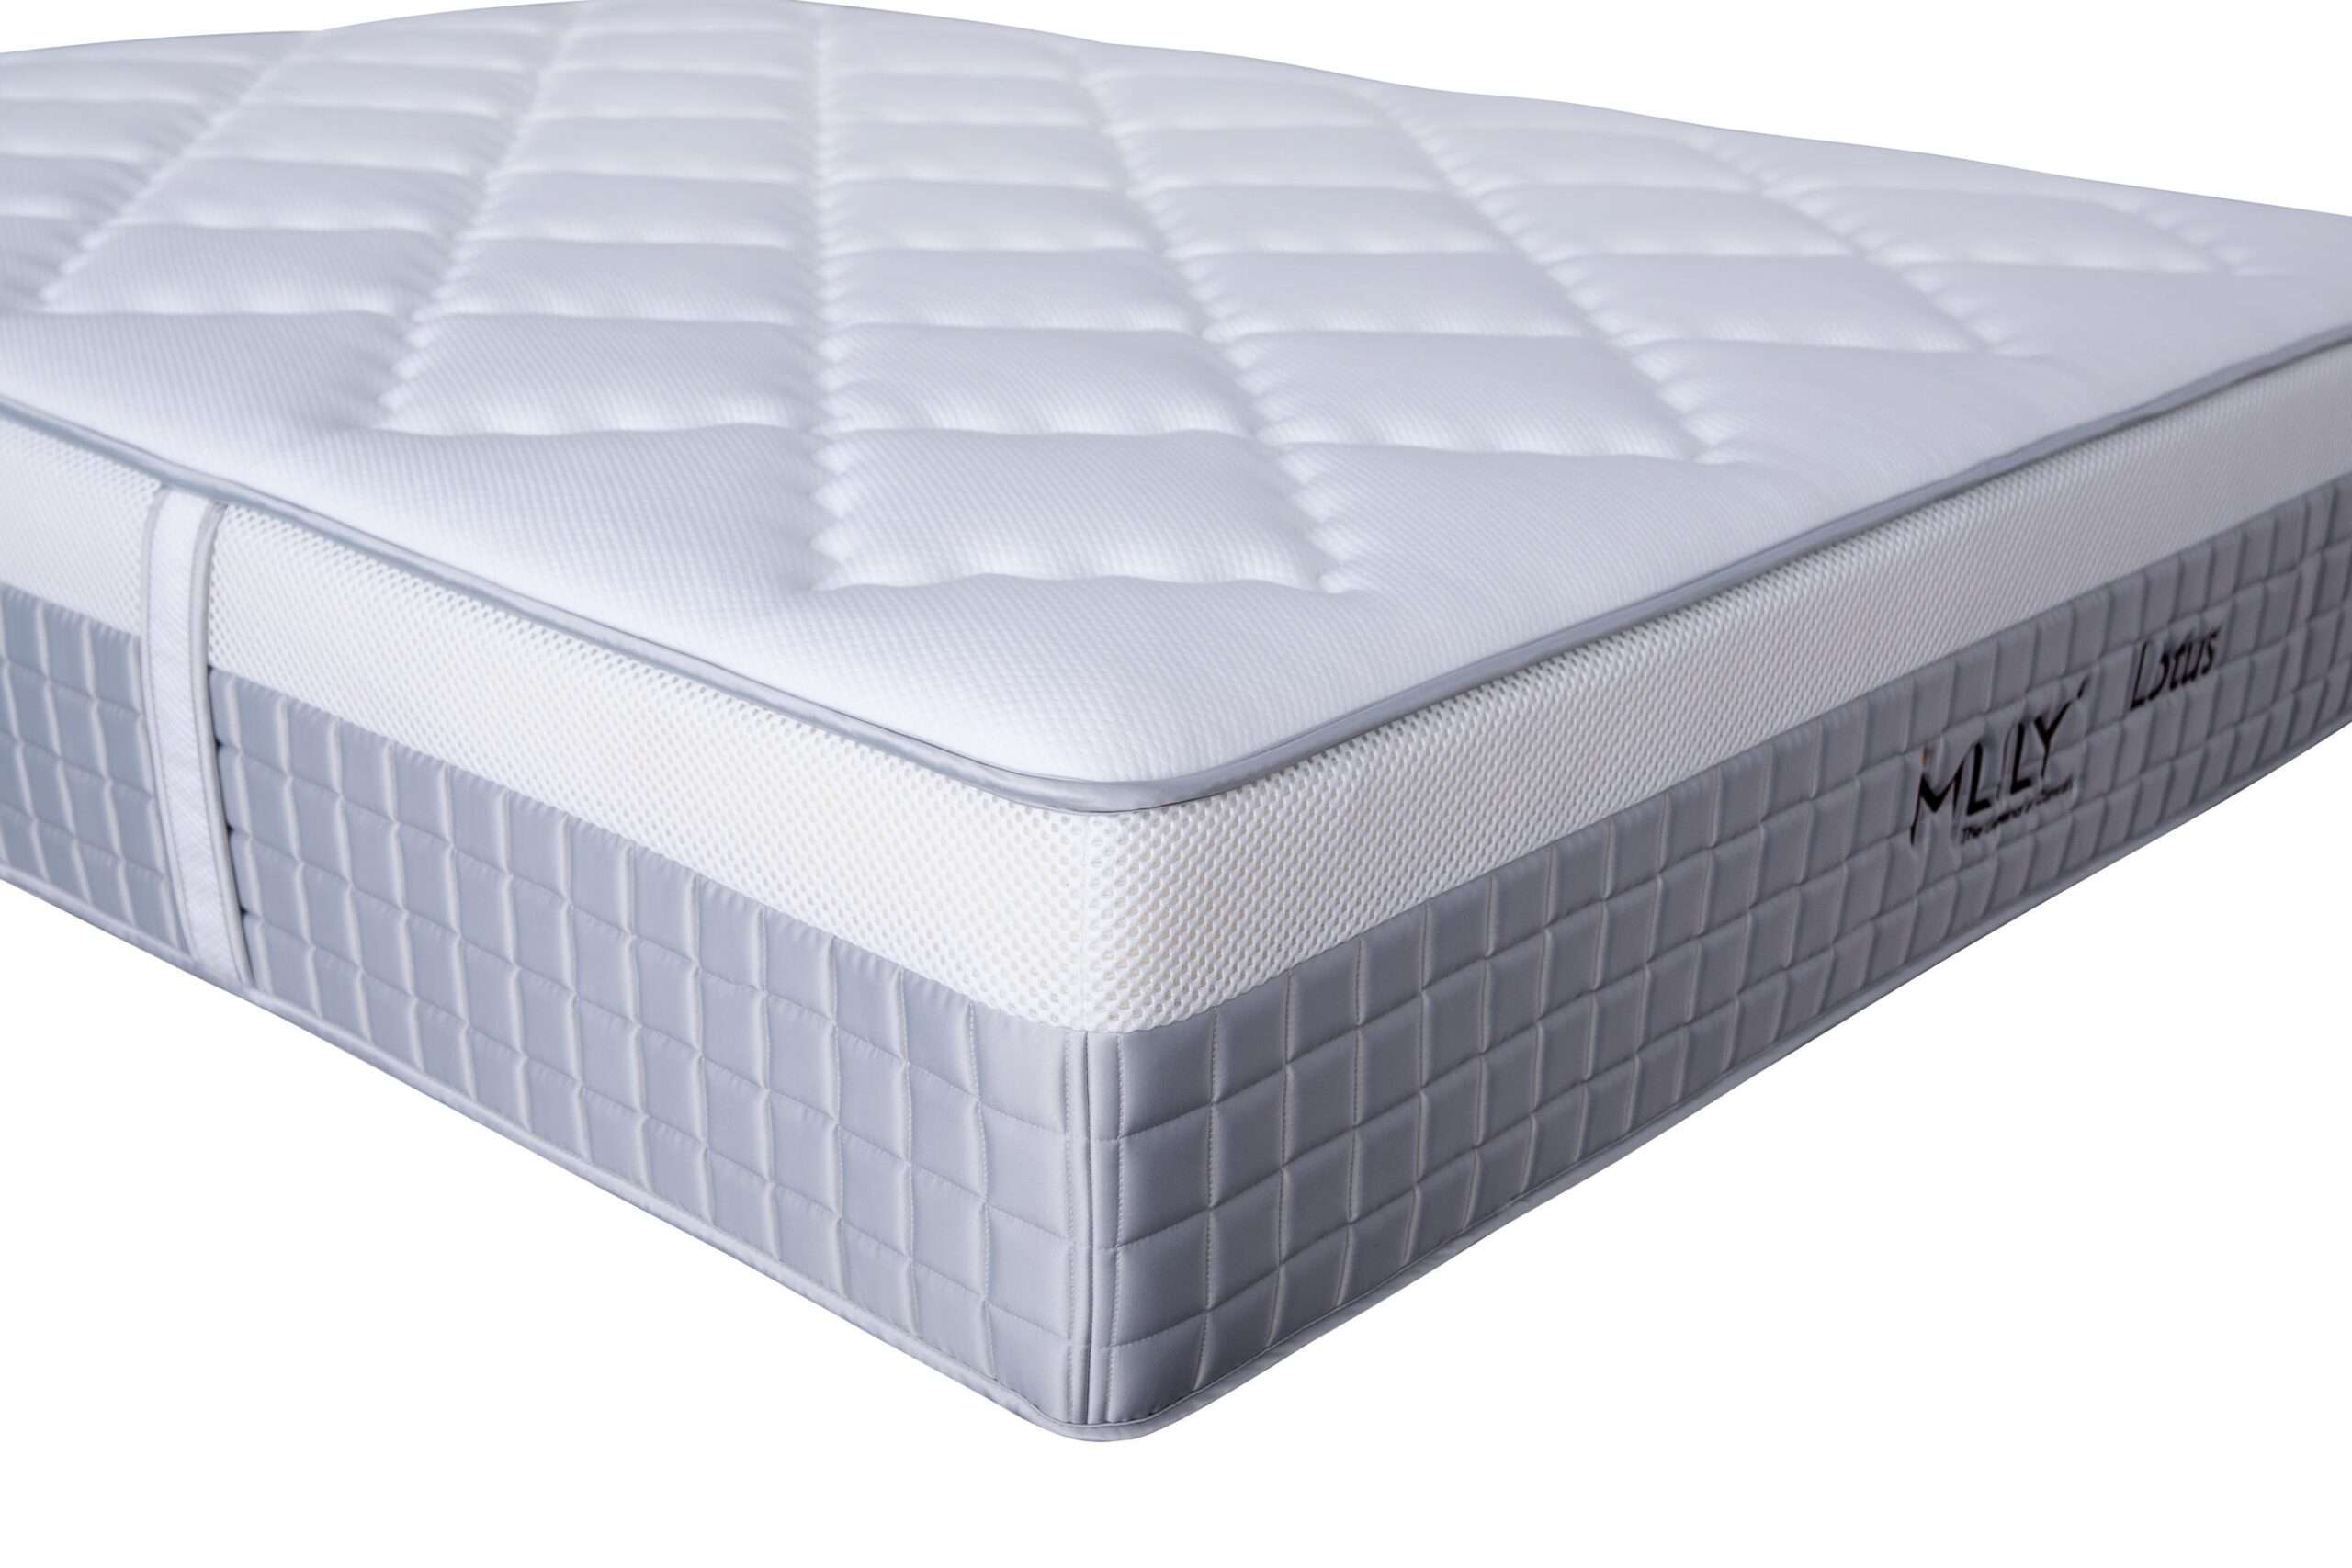 Mlily mattress reviews: Unpacking Comfort and Quality插图4